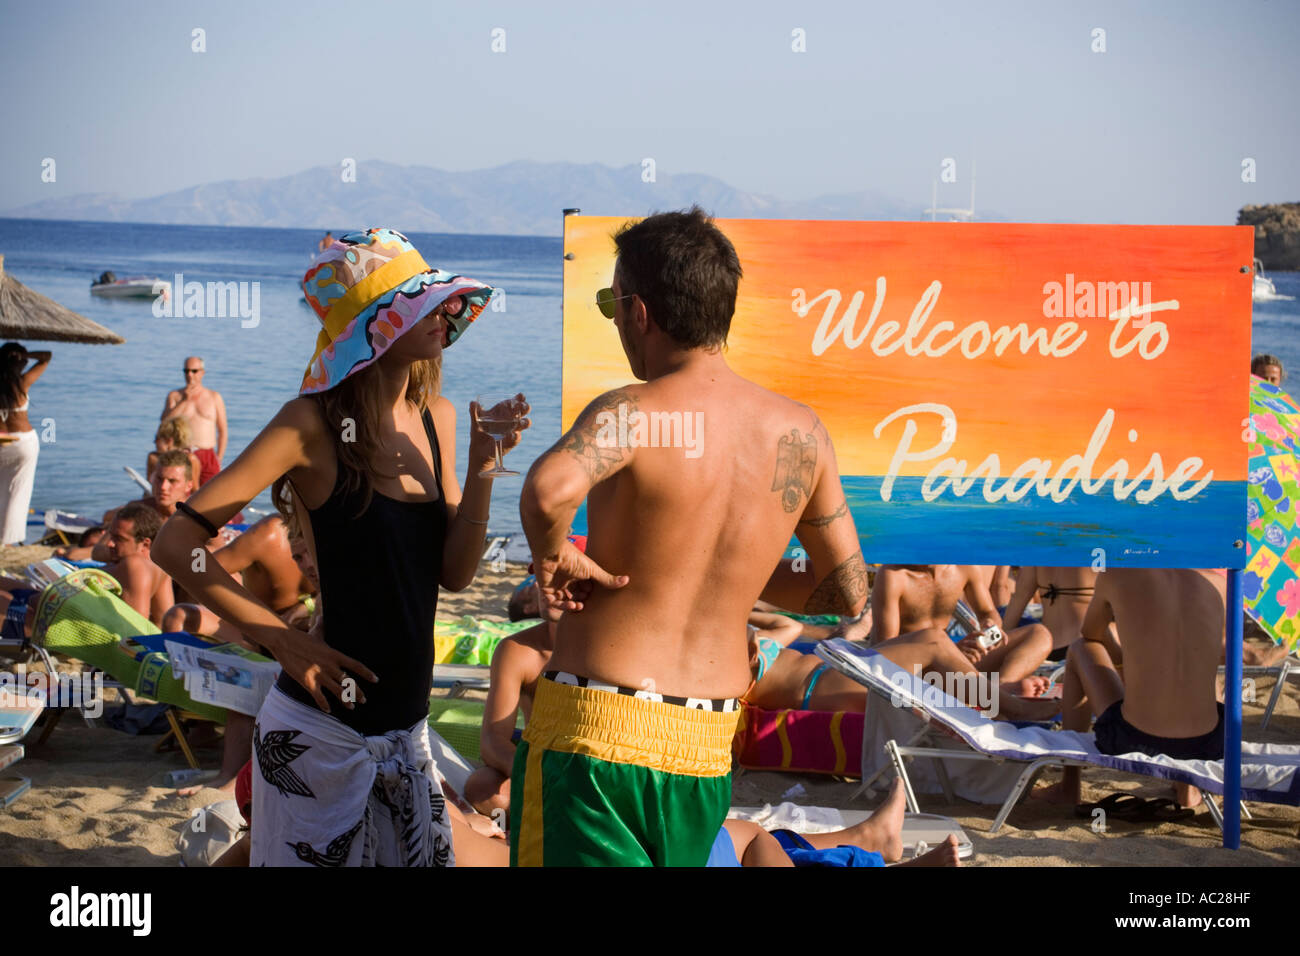 People at Super Paradise Beach knowing as a centrum of gays and nudism Psarou Mykonos Greece Stock Photo